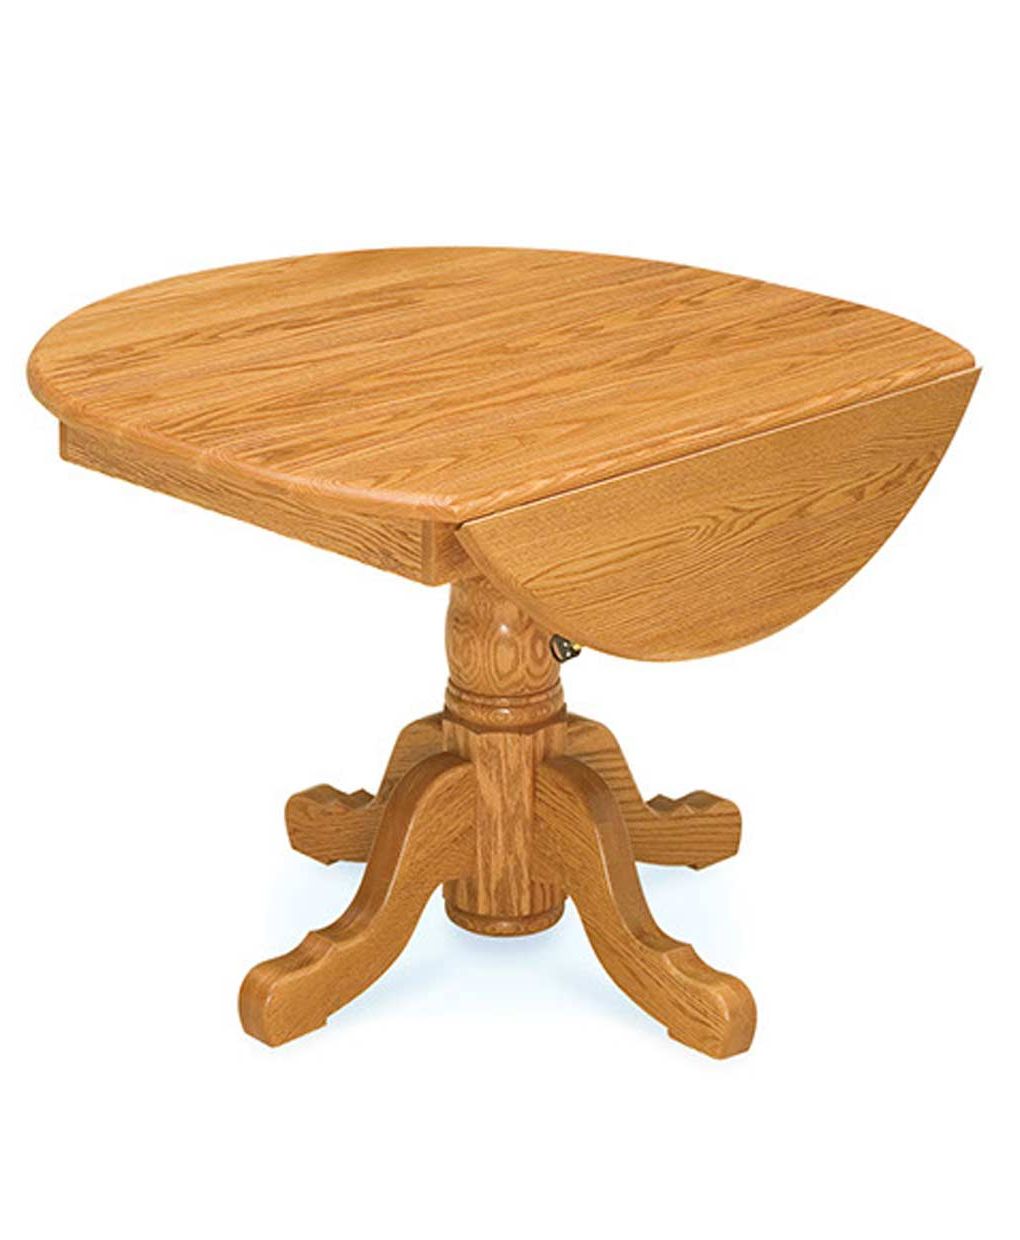 Drop Leaf Pedestal Table – Amish Direct Furniture Inside Most Up To Date Round Pedestal Dining Tables With One Leaf (View 10 of 15)